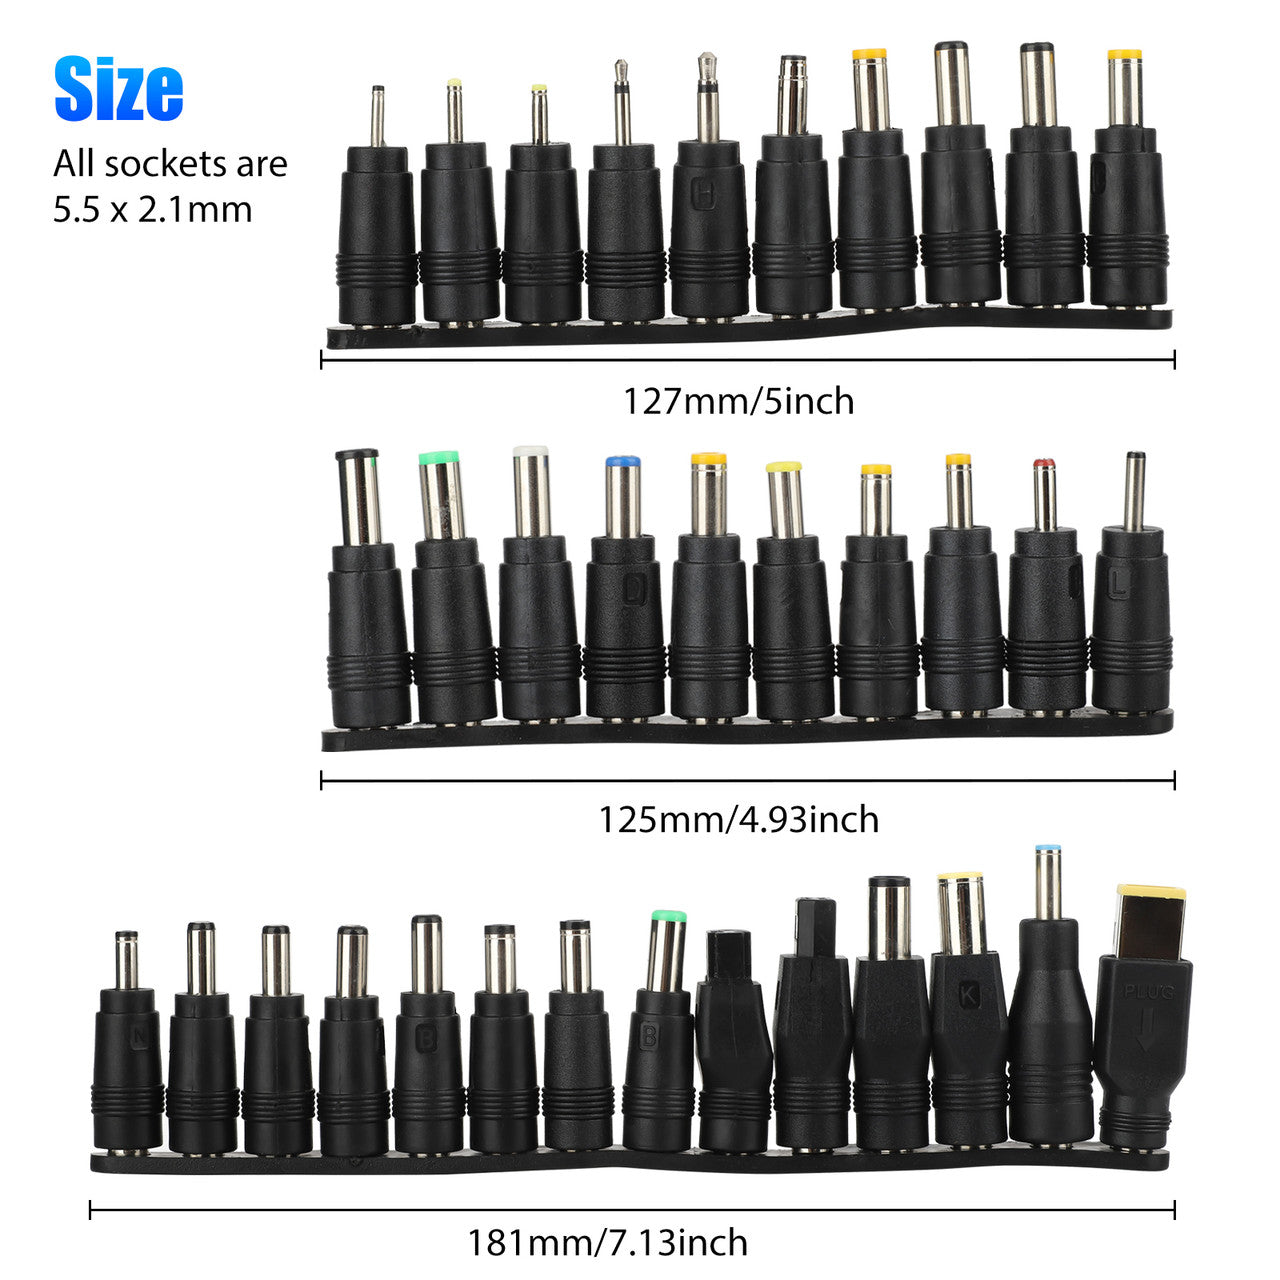 34 Pcs Charger Power Supply Adapter Plug Kit - For AC Power Adapter, 5.5x2.1mm Female Base,Universal Laptop NoteBook connector